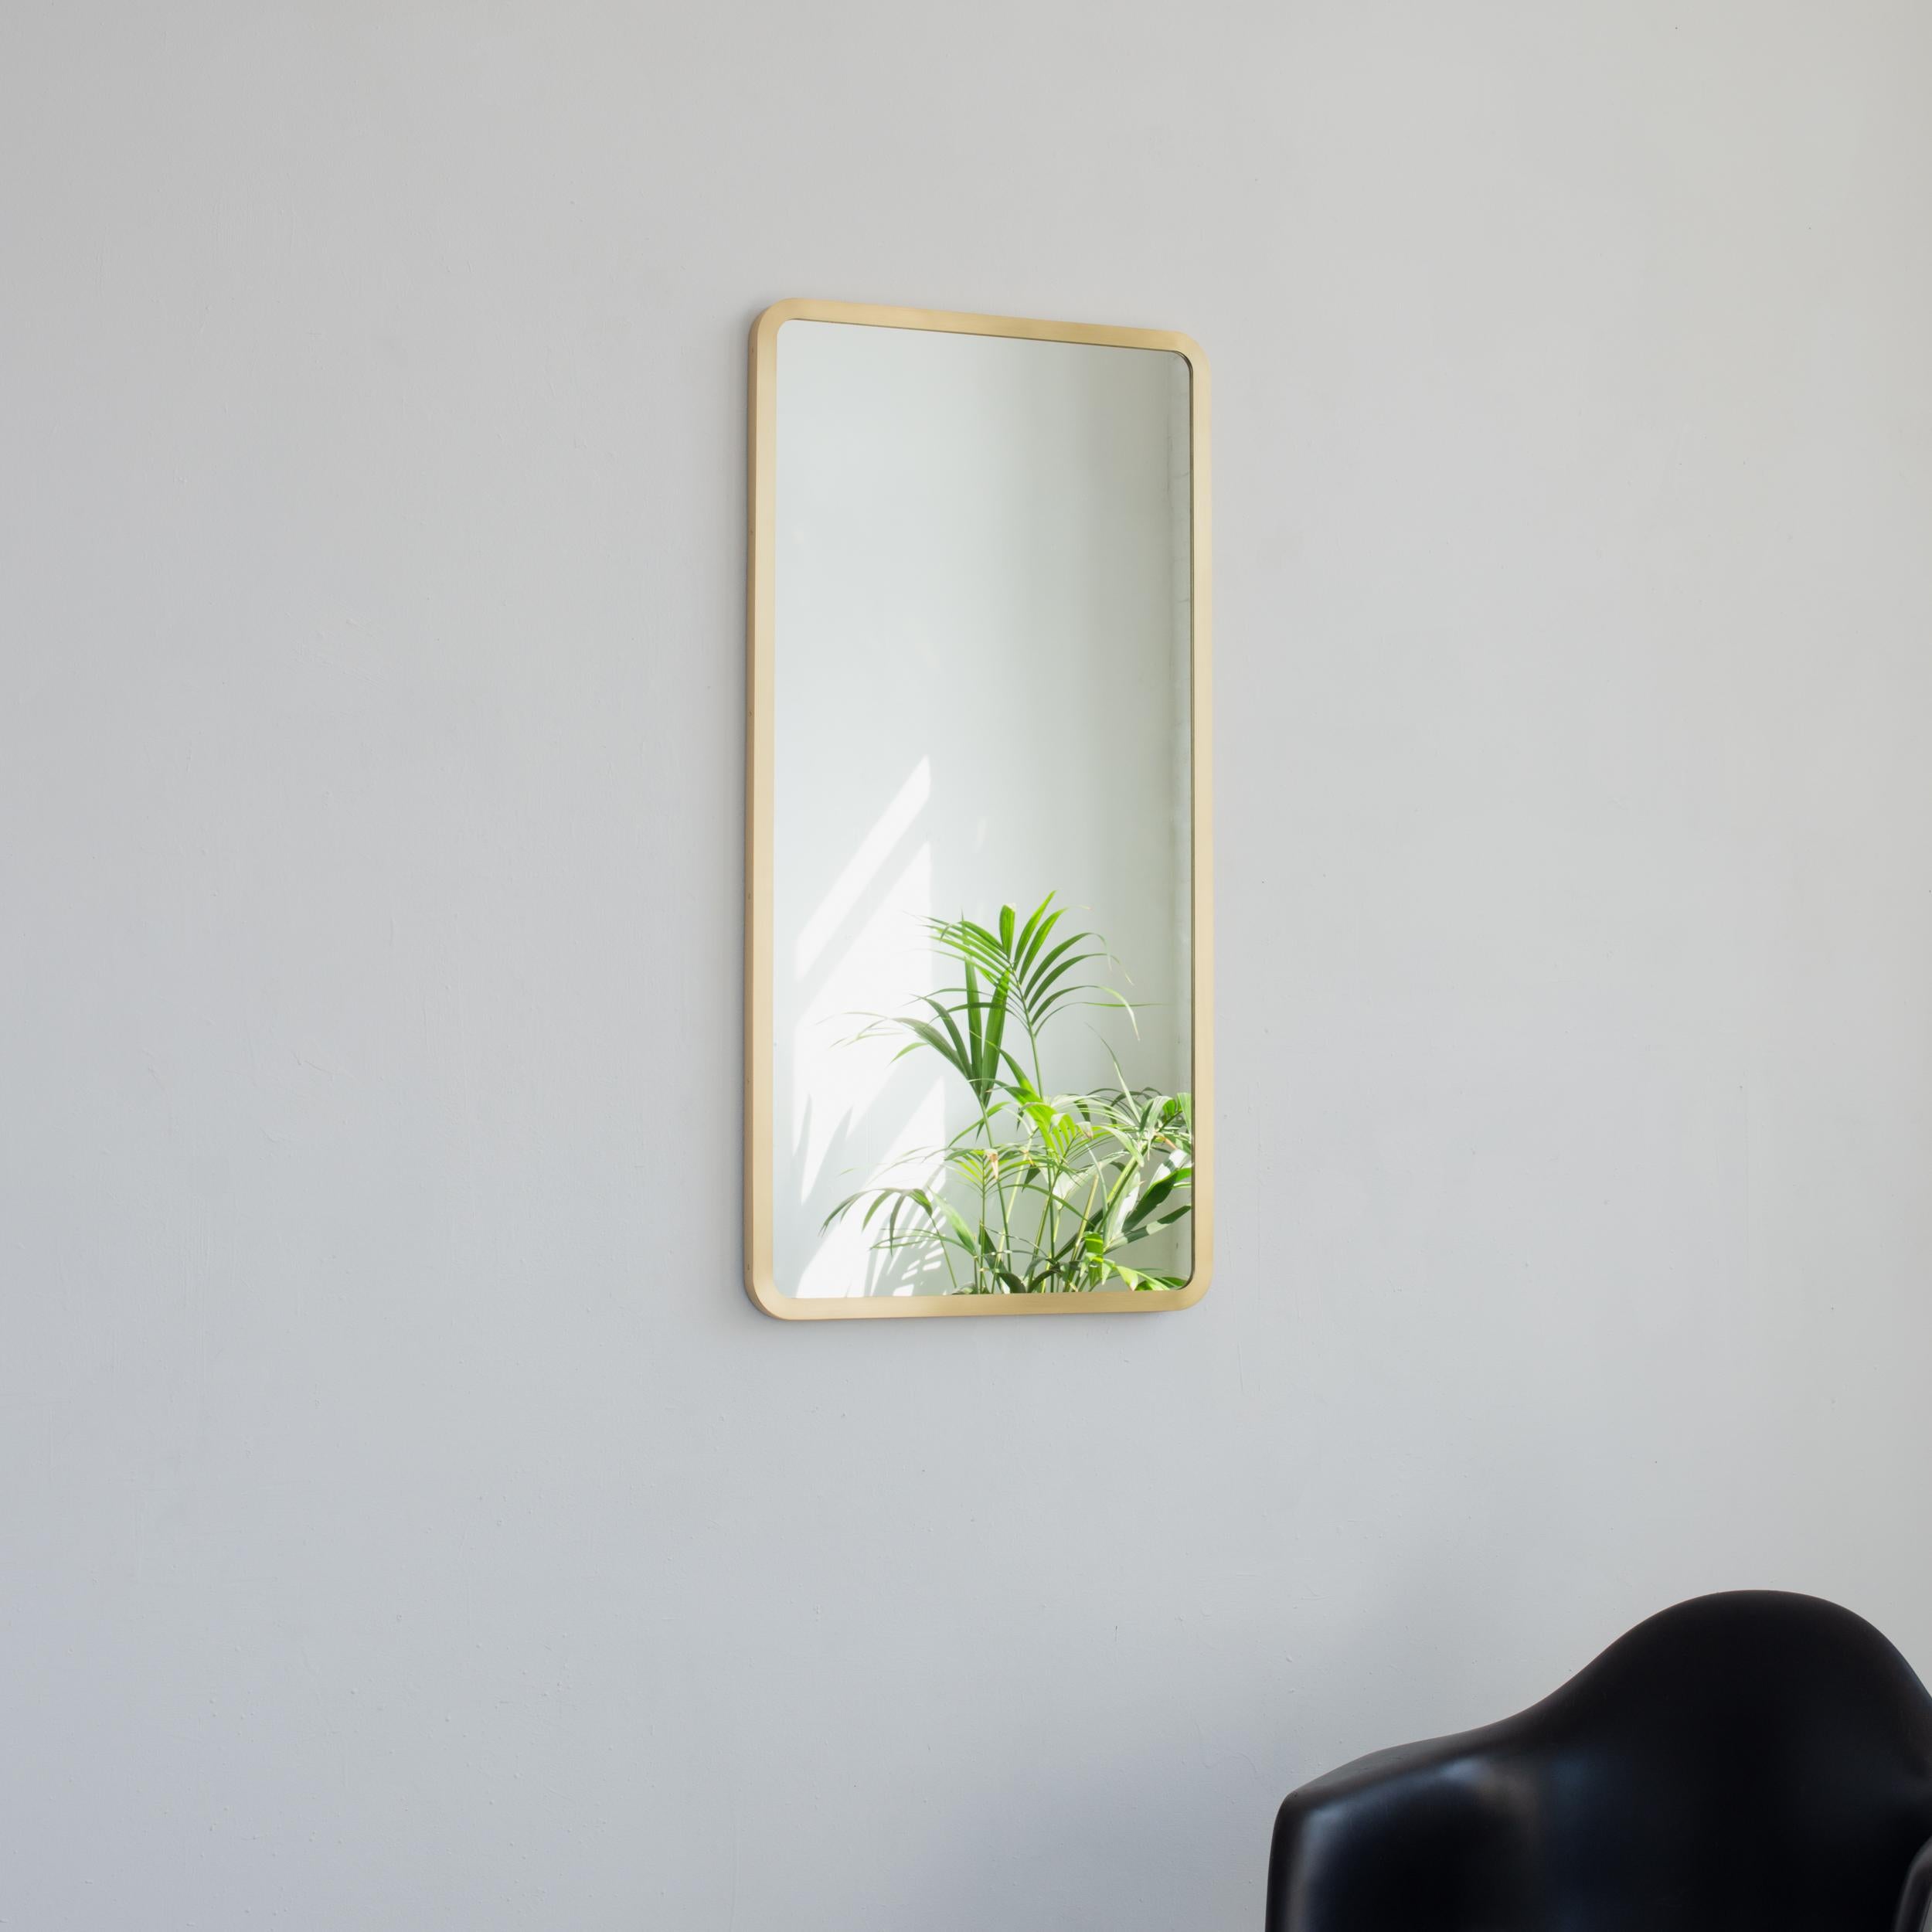 Quadris Rectangular Minimalist Mirror with a Brass Frame, Small In New Condition For Sale In London, GB